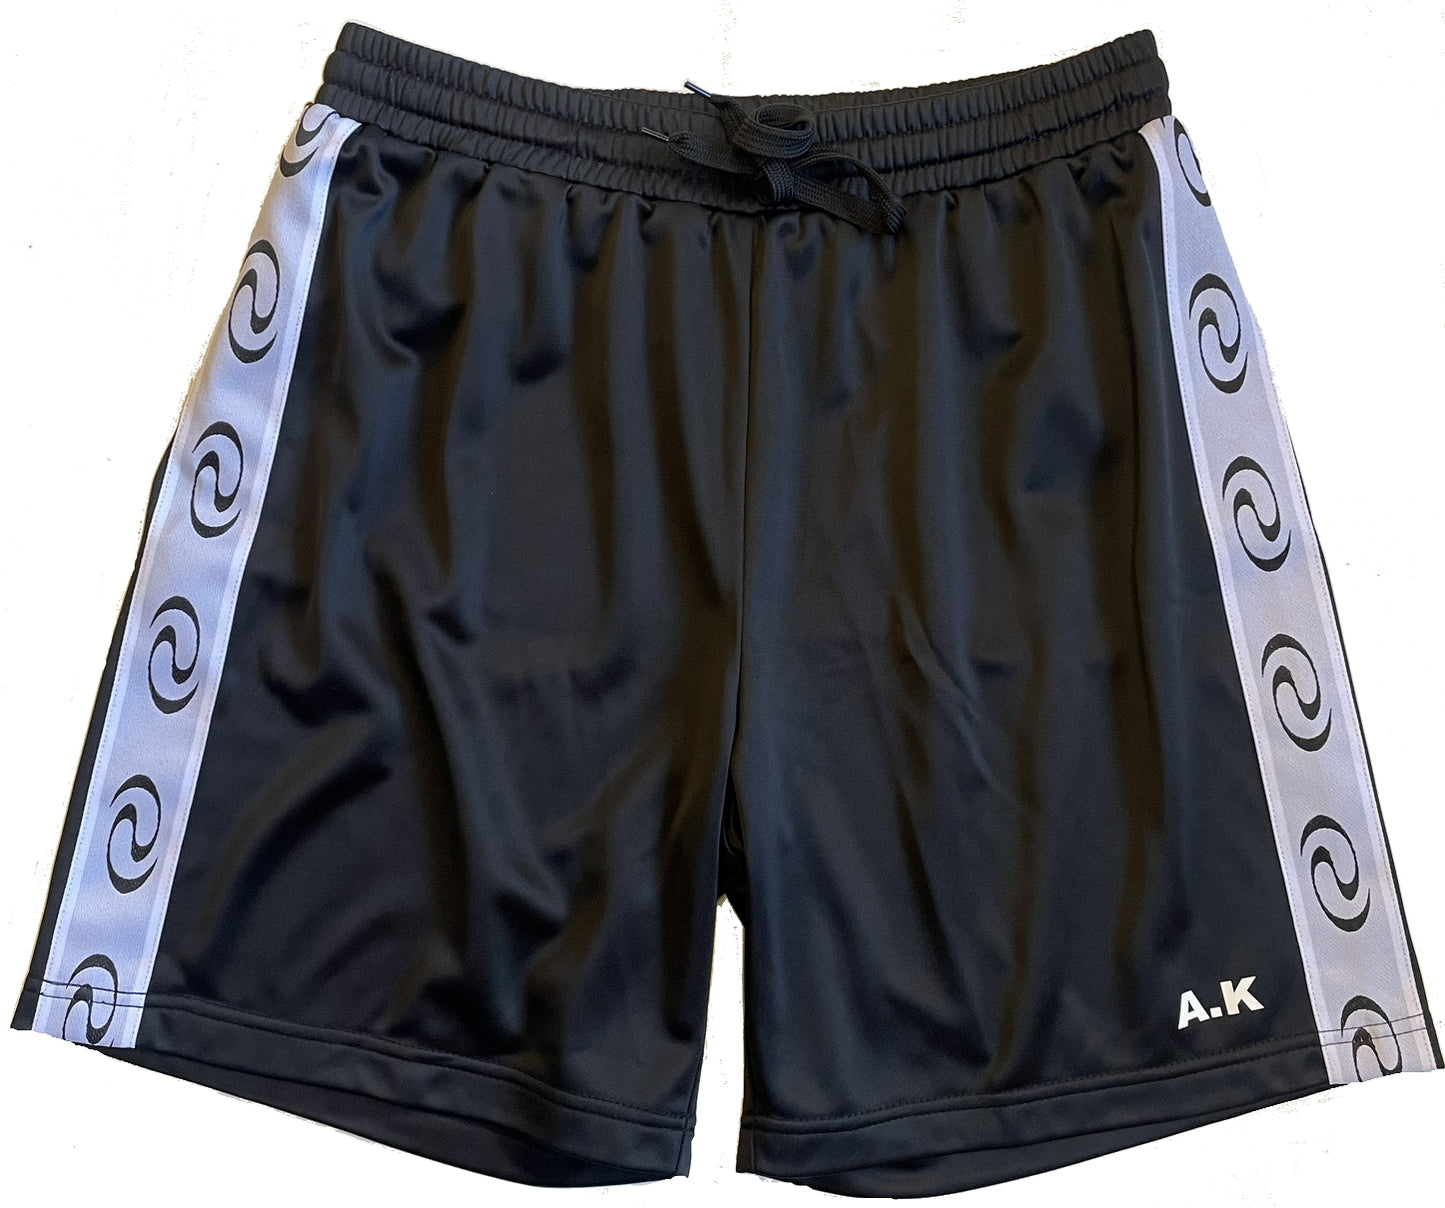 EvieRS Shorts Black